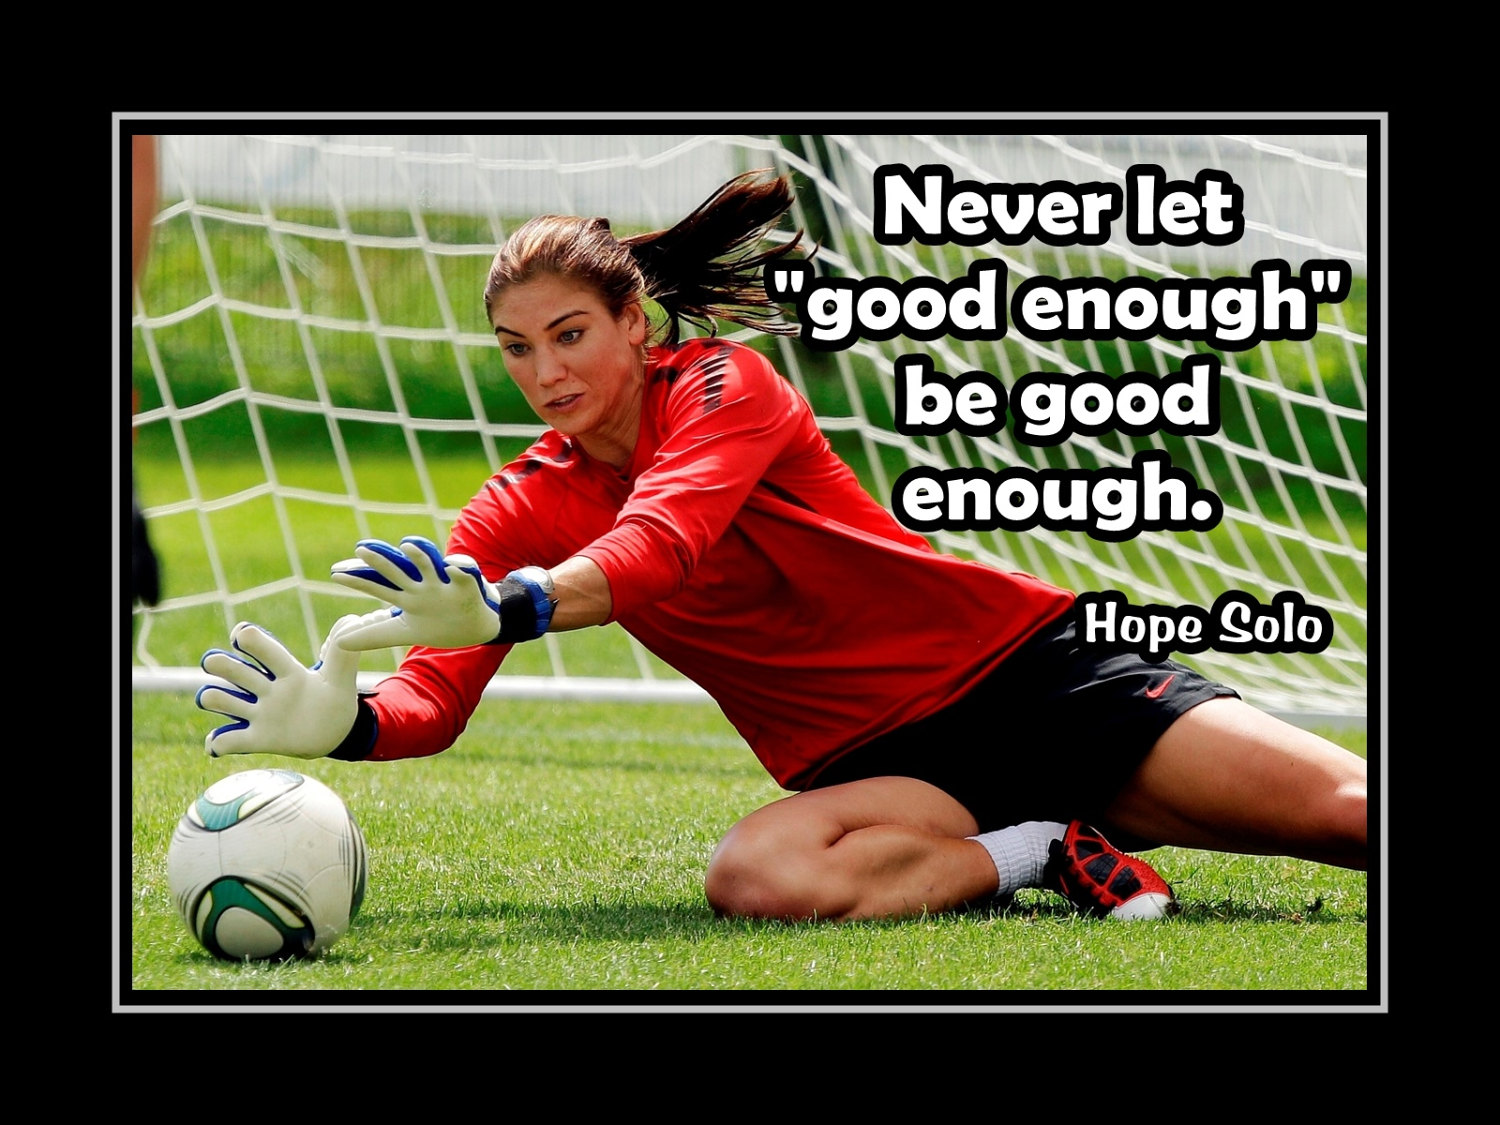 Hope Solo 'Good Enough' Inspirational Soccer Quote Poster, Goalkeeper